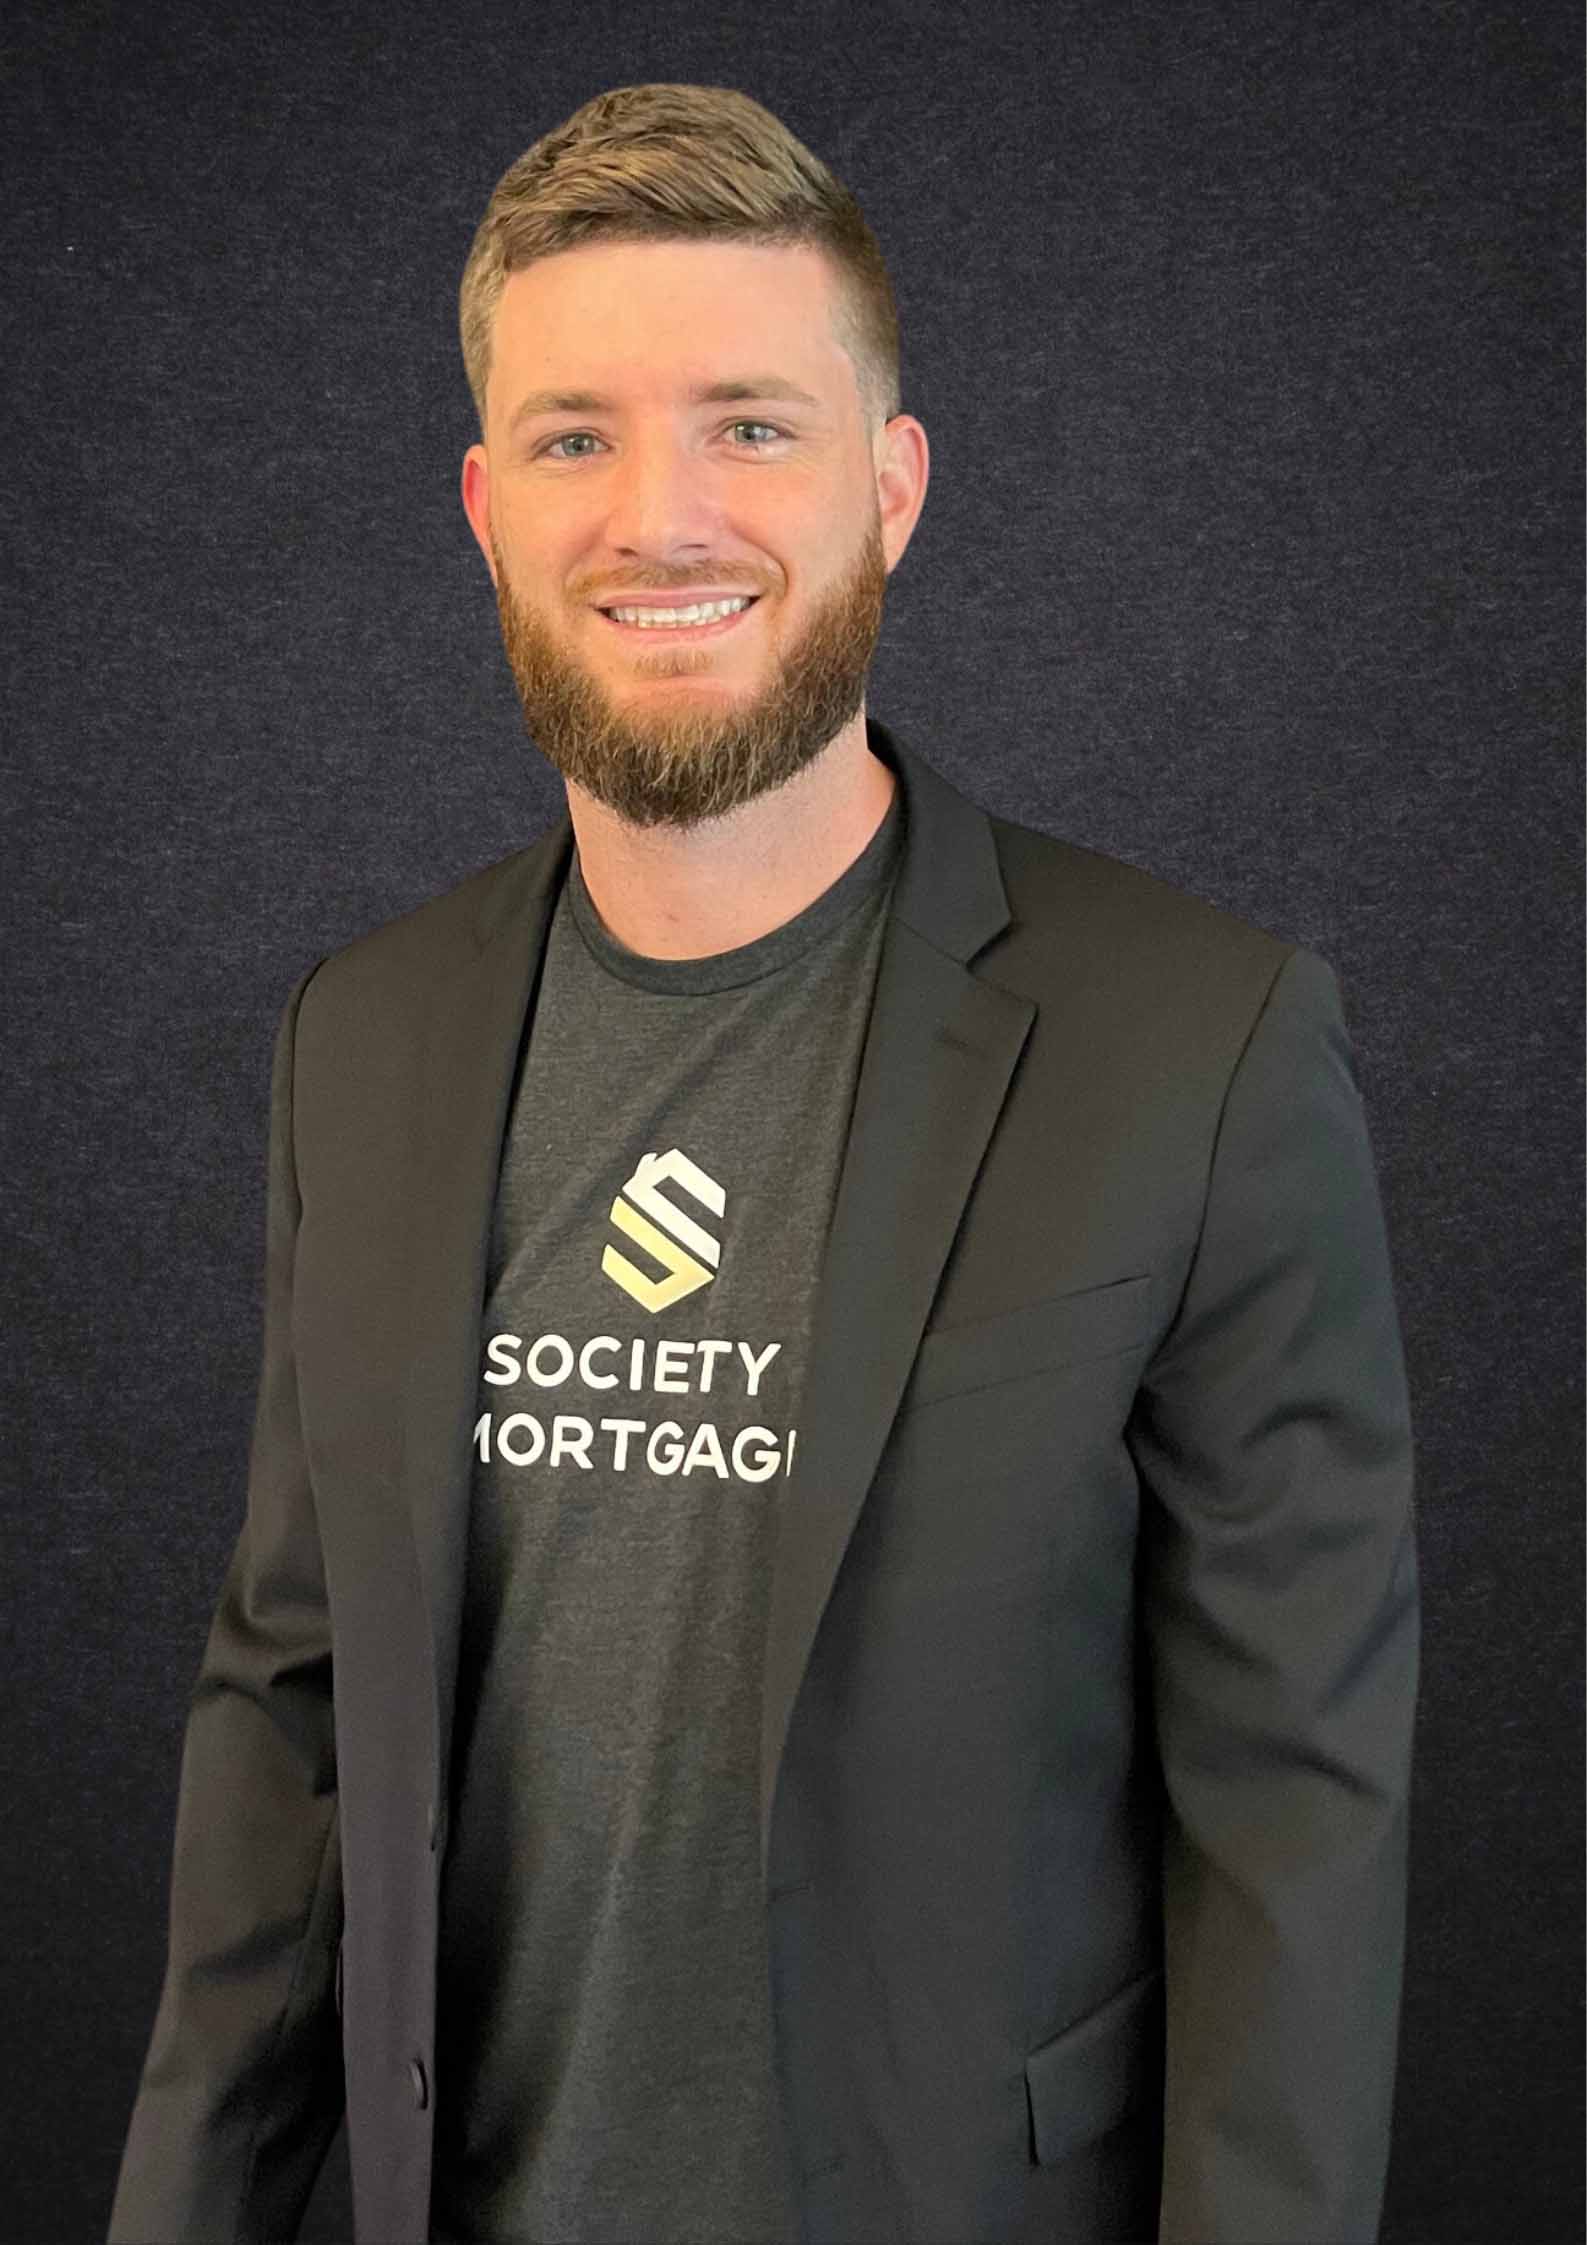 Our loan officer Dylan Arnold working for Society Mortgage